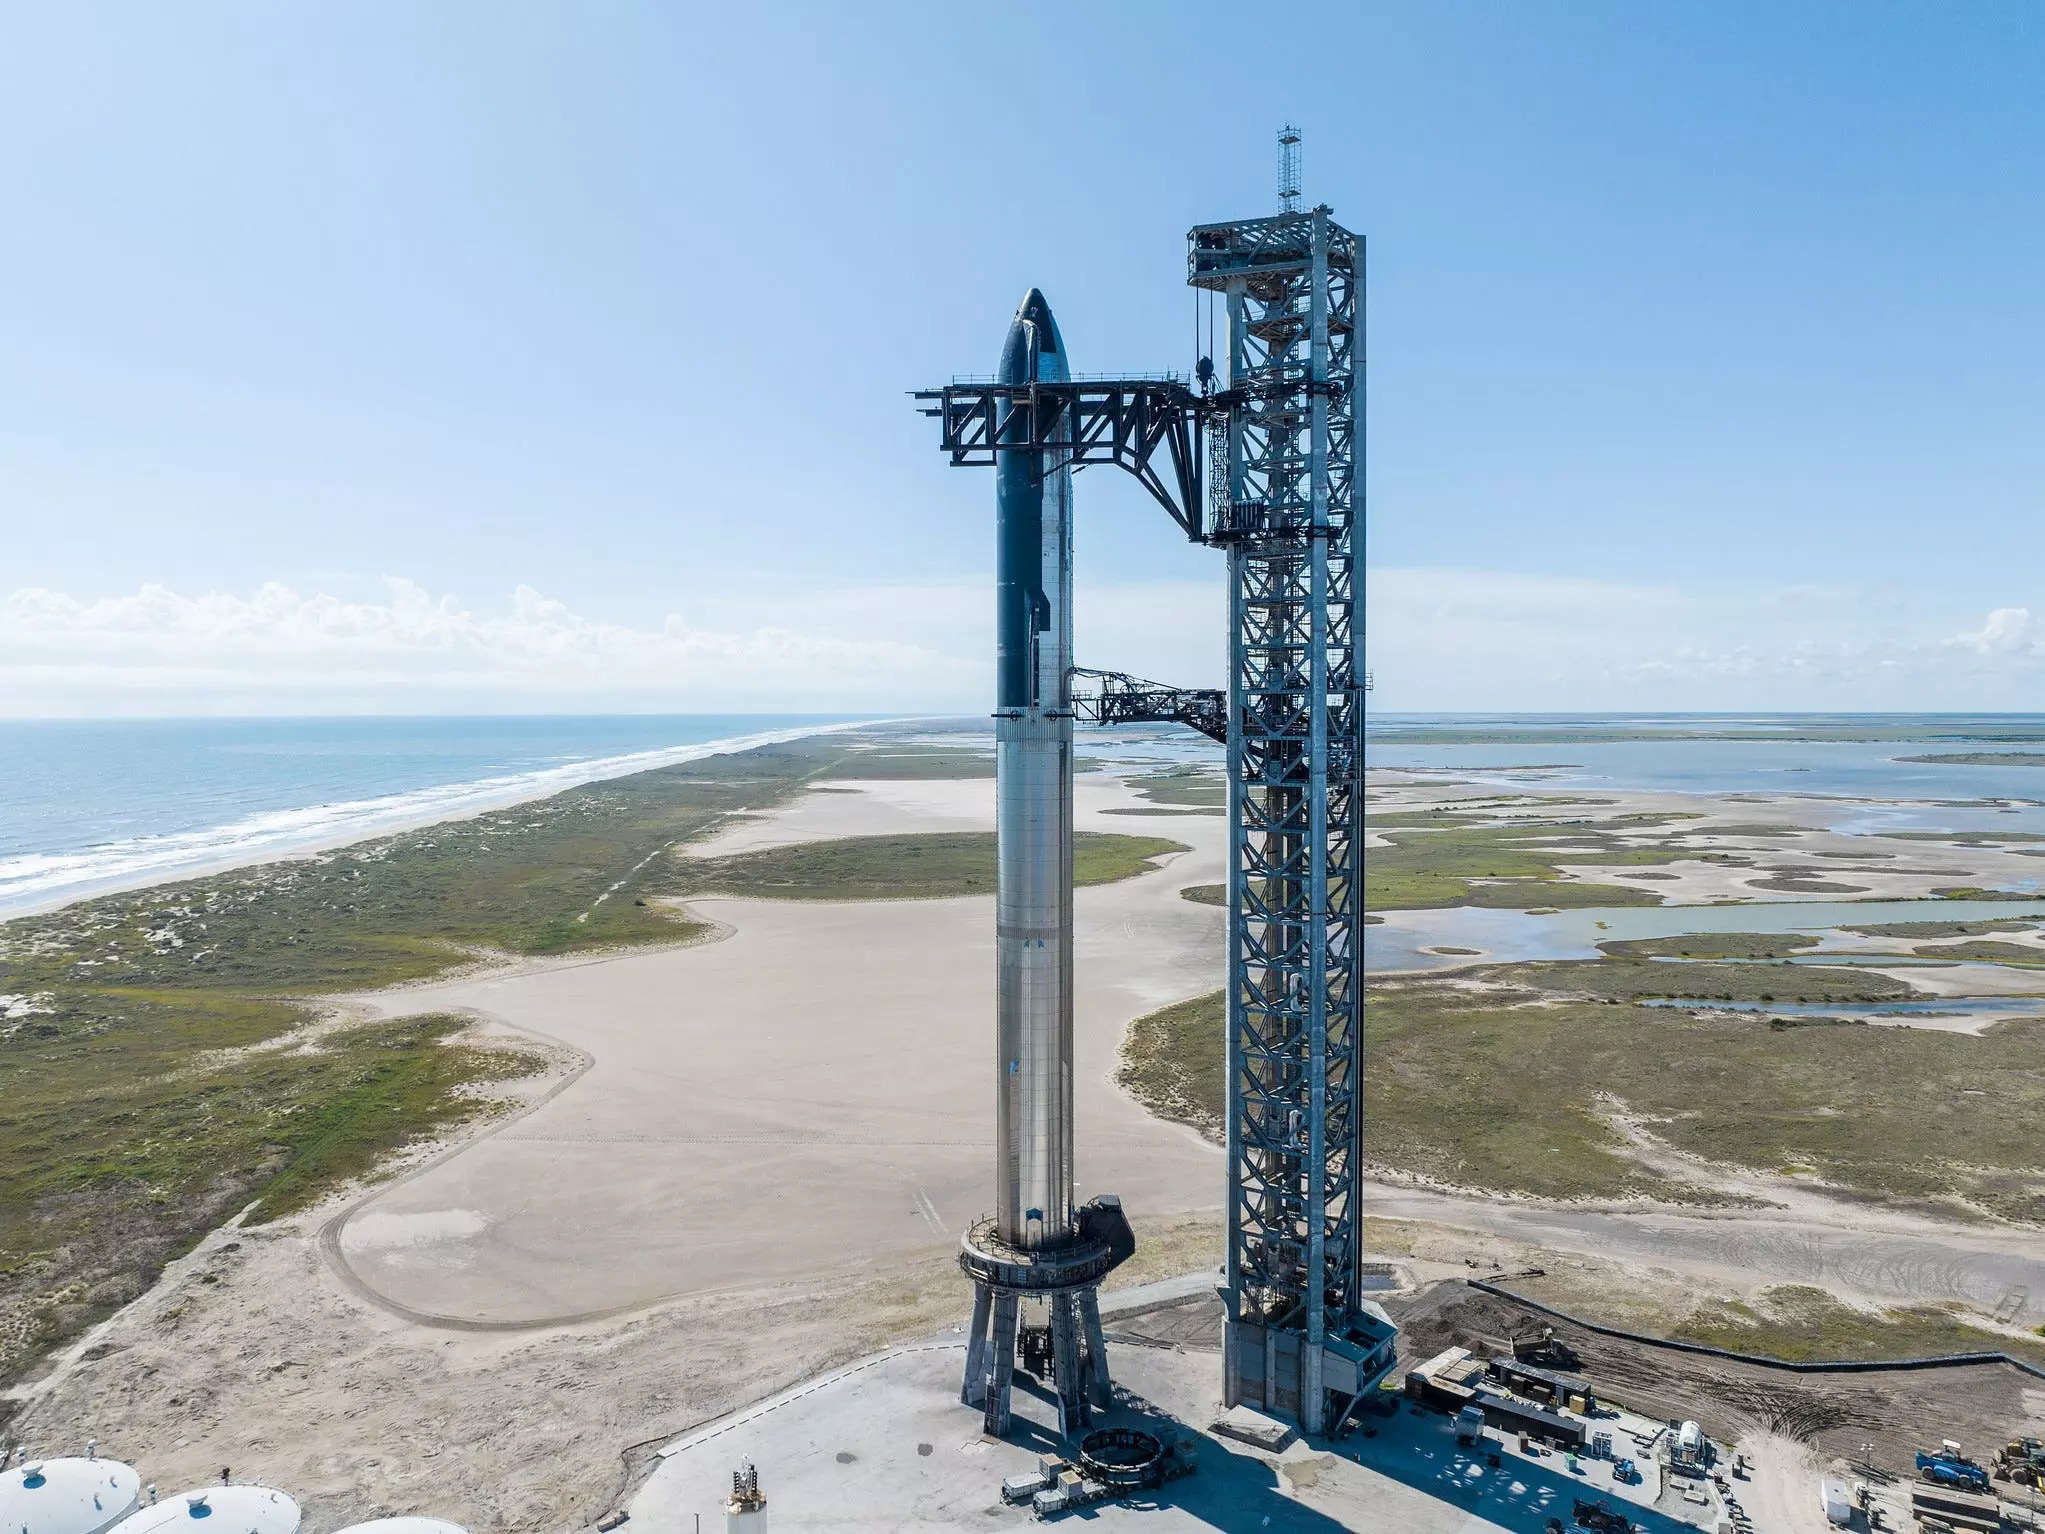 Watch how SpaceX launched Starship, the tallest and most powerful